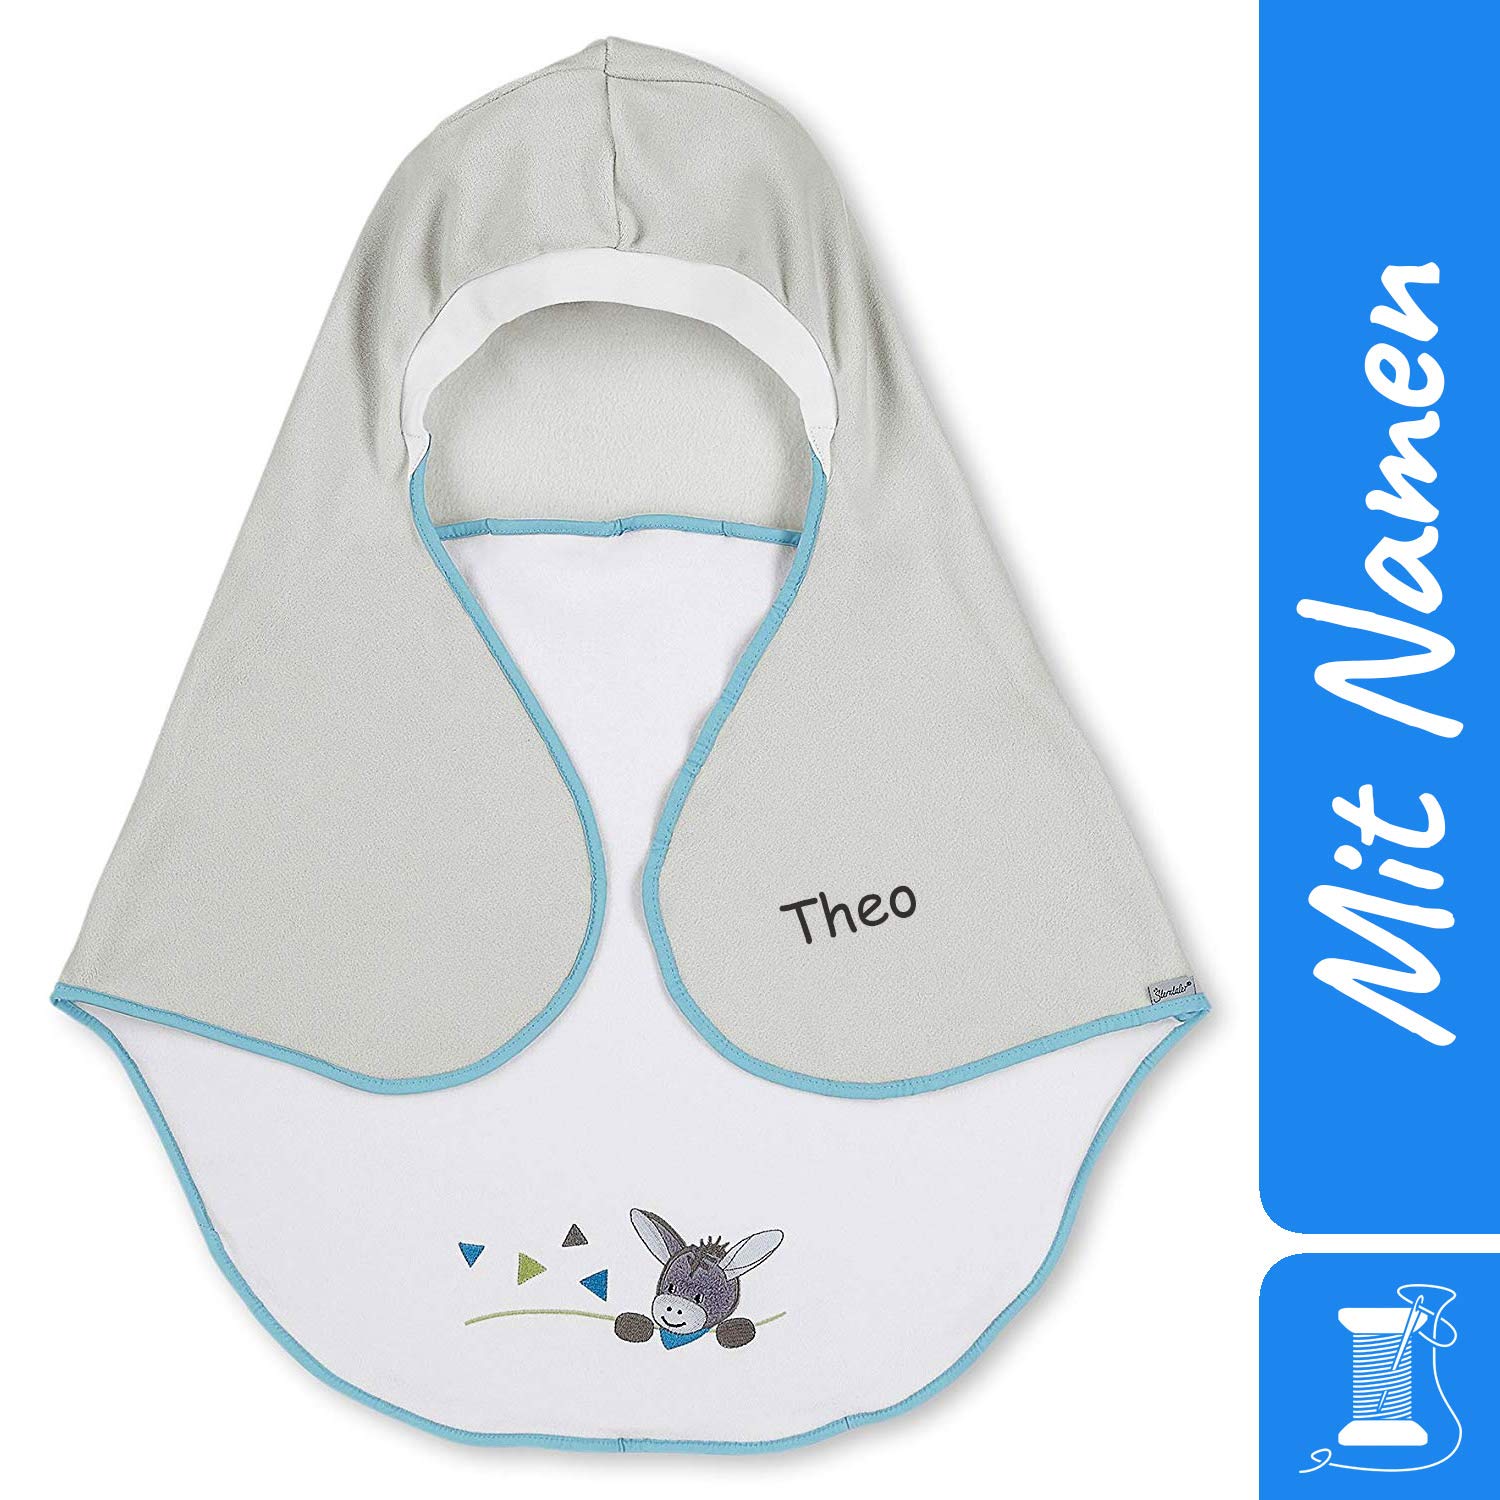 Sterntaler Baby Swaddling Blanket with Name, Universal for Baby Seat, Car Seat, e.g. for Maxi-Cosi, Cybex, Kiddy, Römer, for Pram, Buggy or Cot, Erik Donkey Grey/Blue